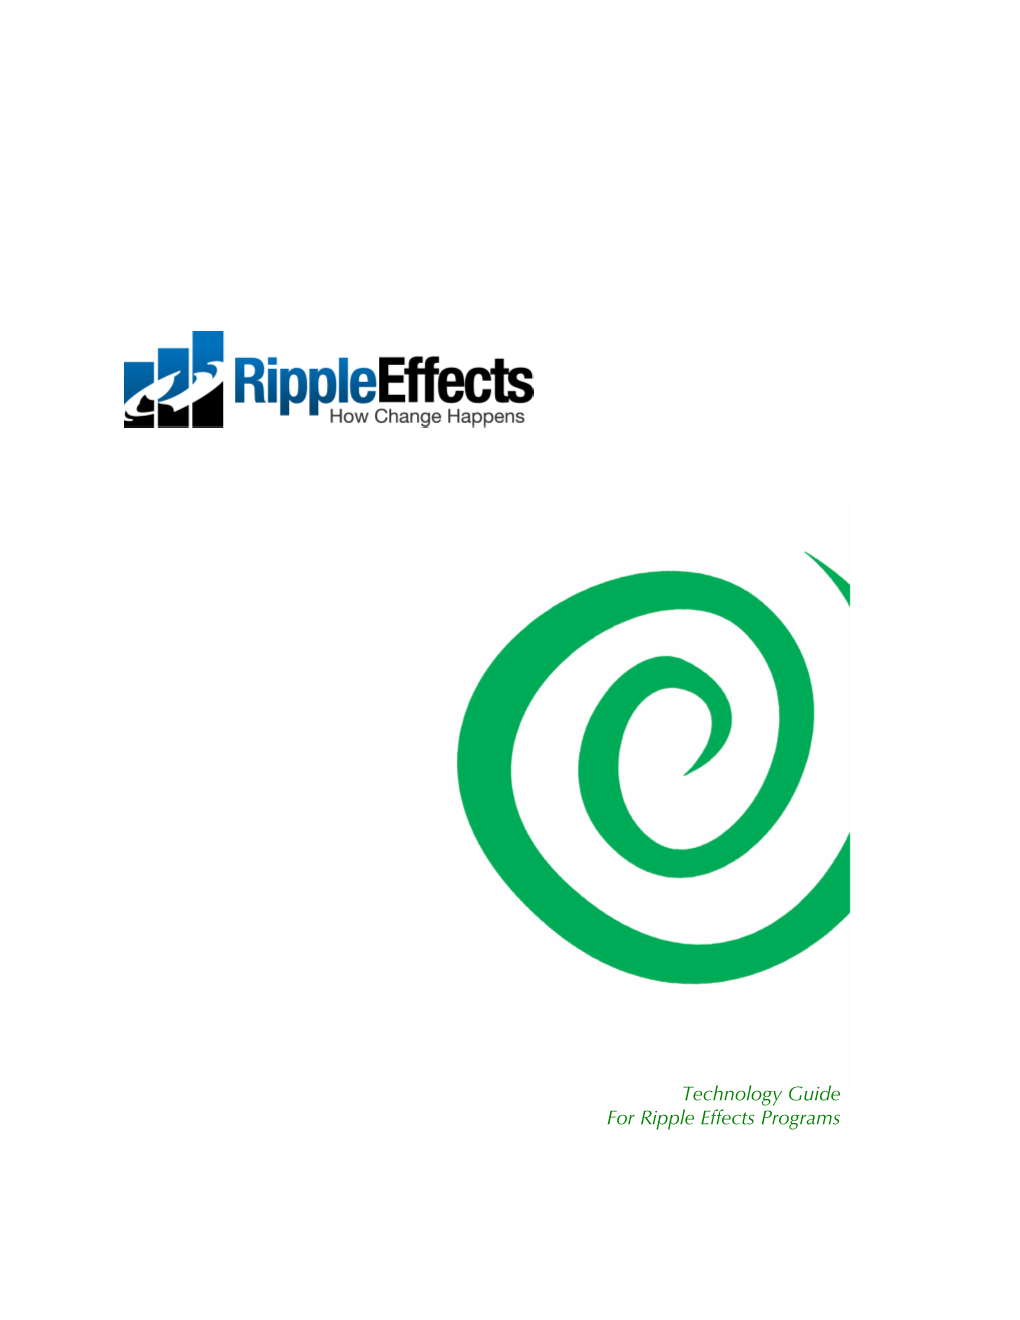 Technology Guide for Ripple Effects Programs